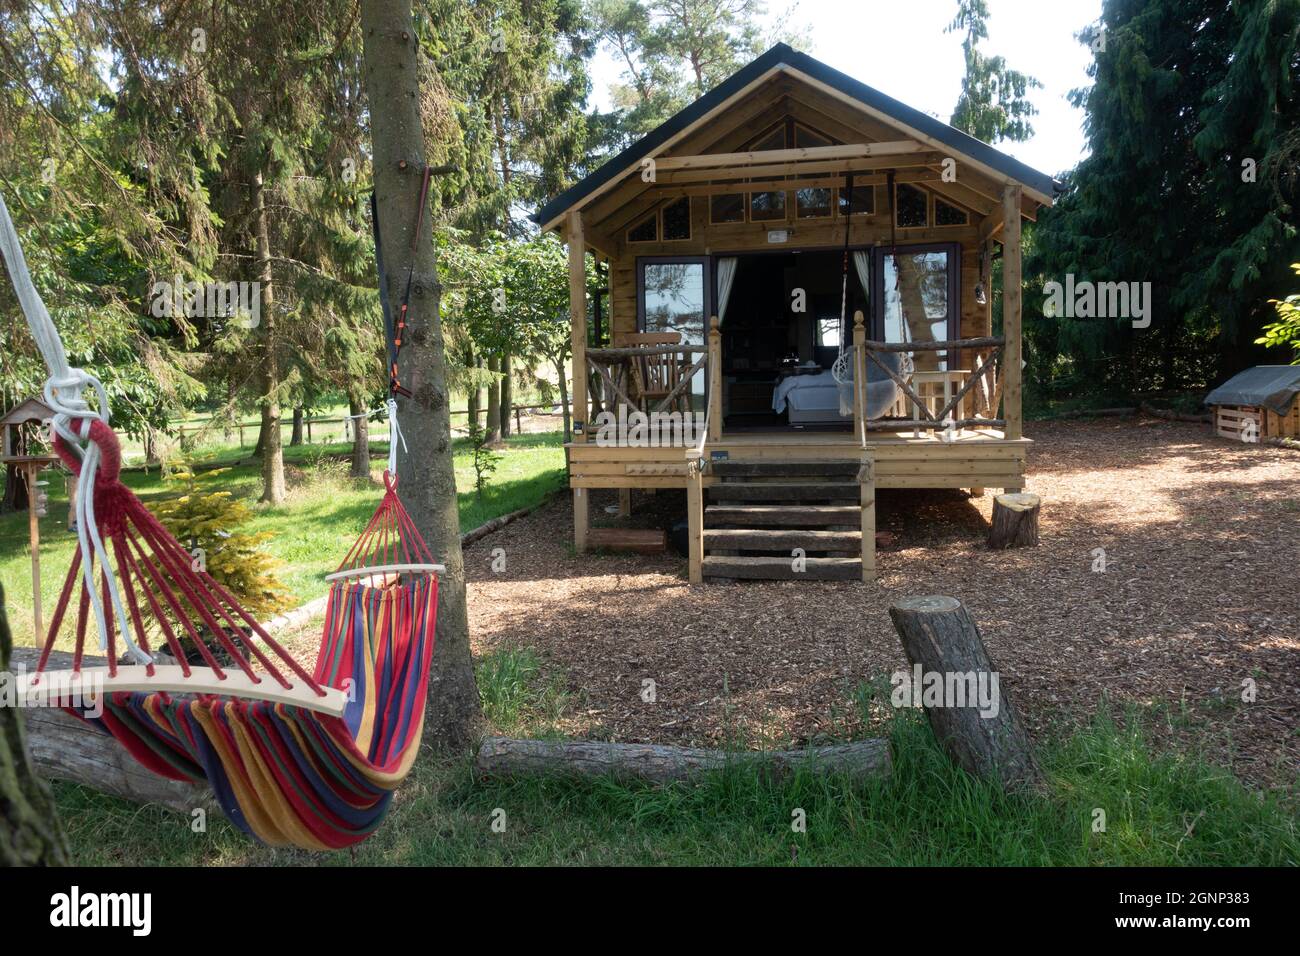 Pine Lodge timber built eco glamping cabin Cotswolds UK Stock Photo